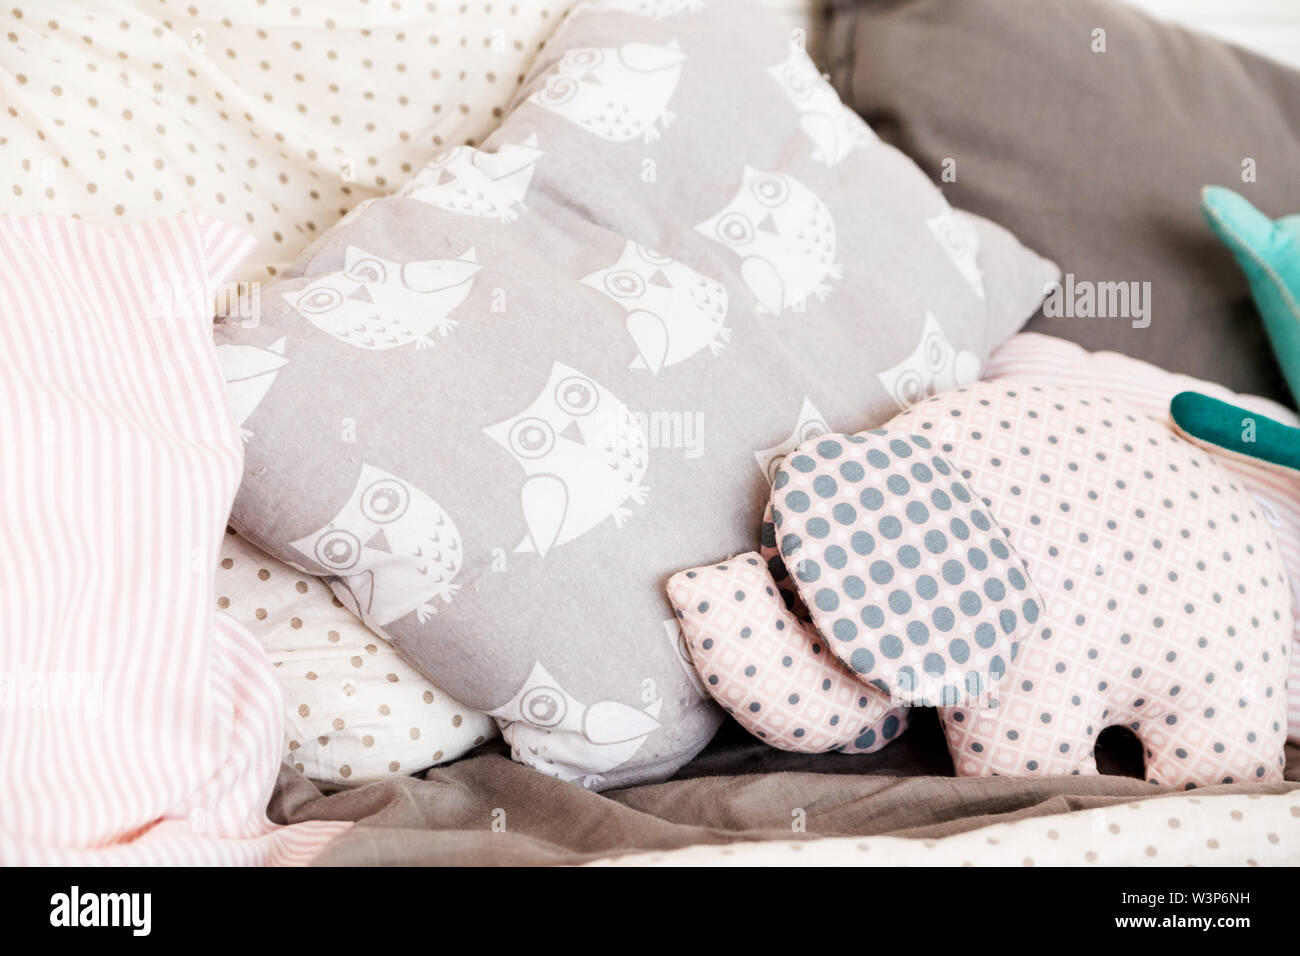 Soft baby pillows on the bed. Pillow with painted owls and soft toy in the form of an elephant Stock Photo